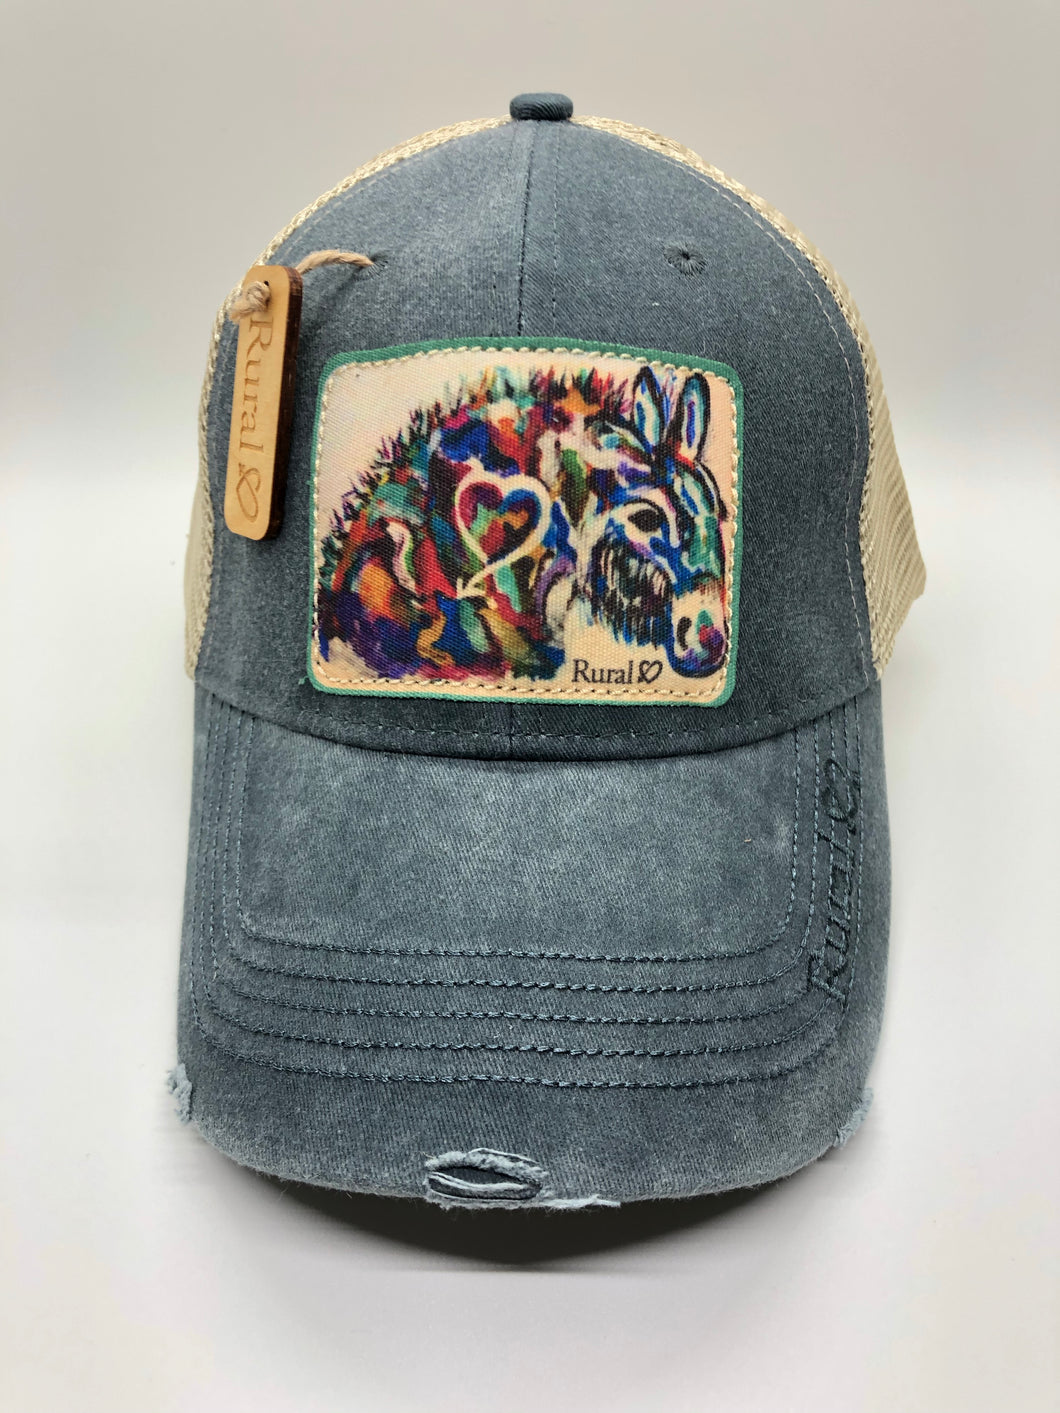 Rural Heart by Rene Earnhardt “Donkey Love” ball cap in denim or turquoise hat with Velcro closure